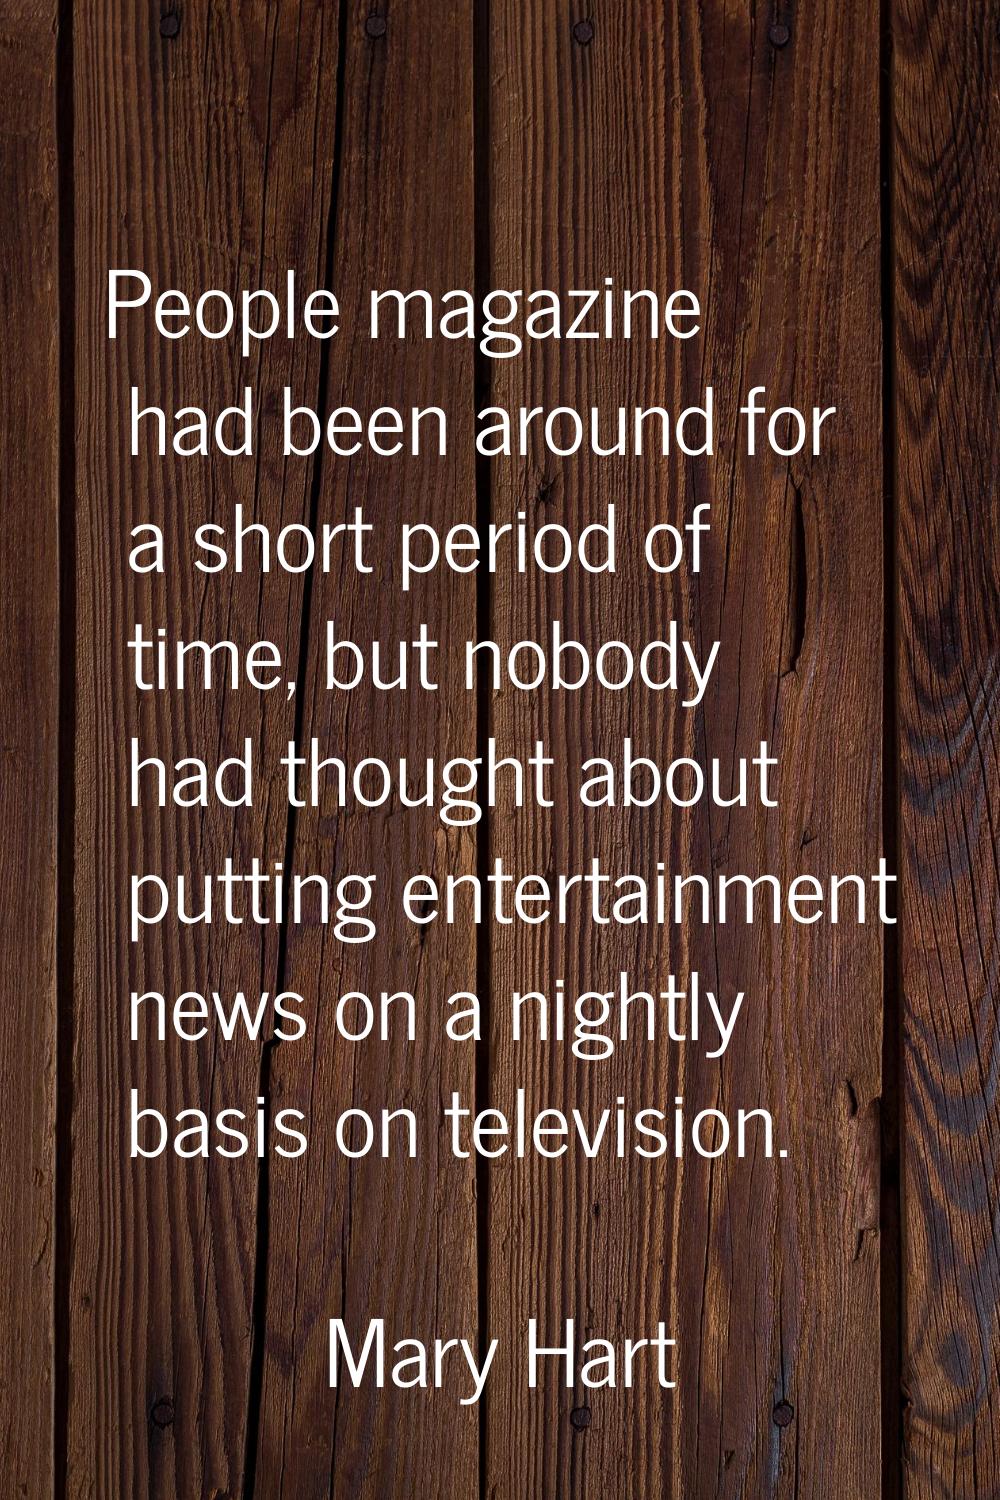 People magazine had been around for a short period of time, but nobody had thought about putting en